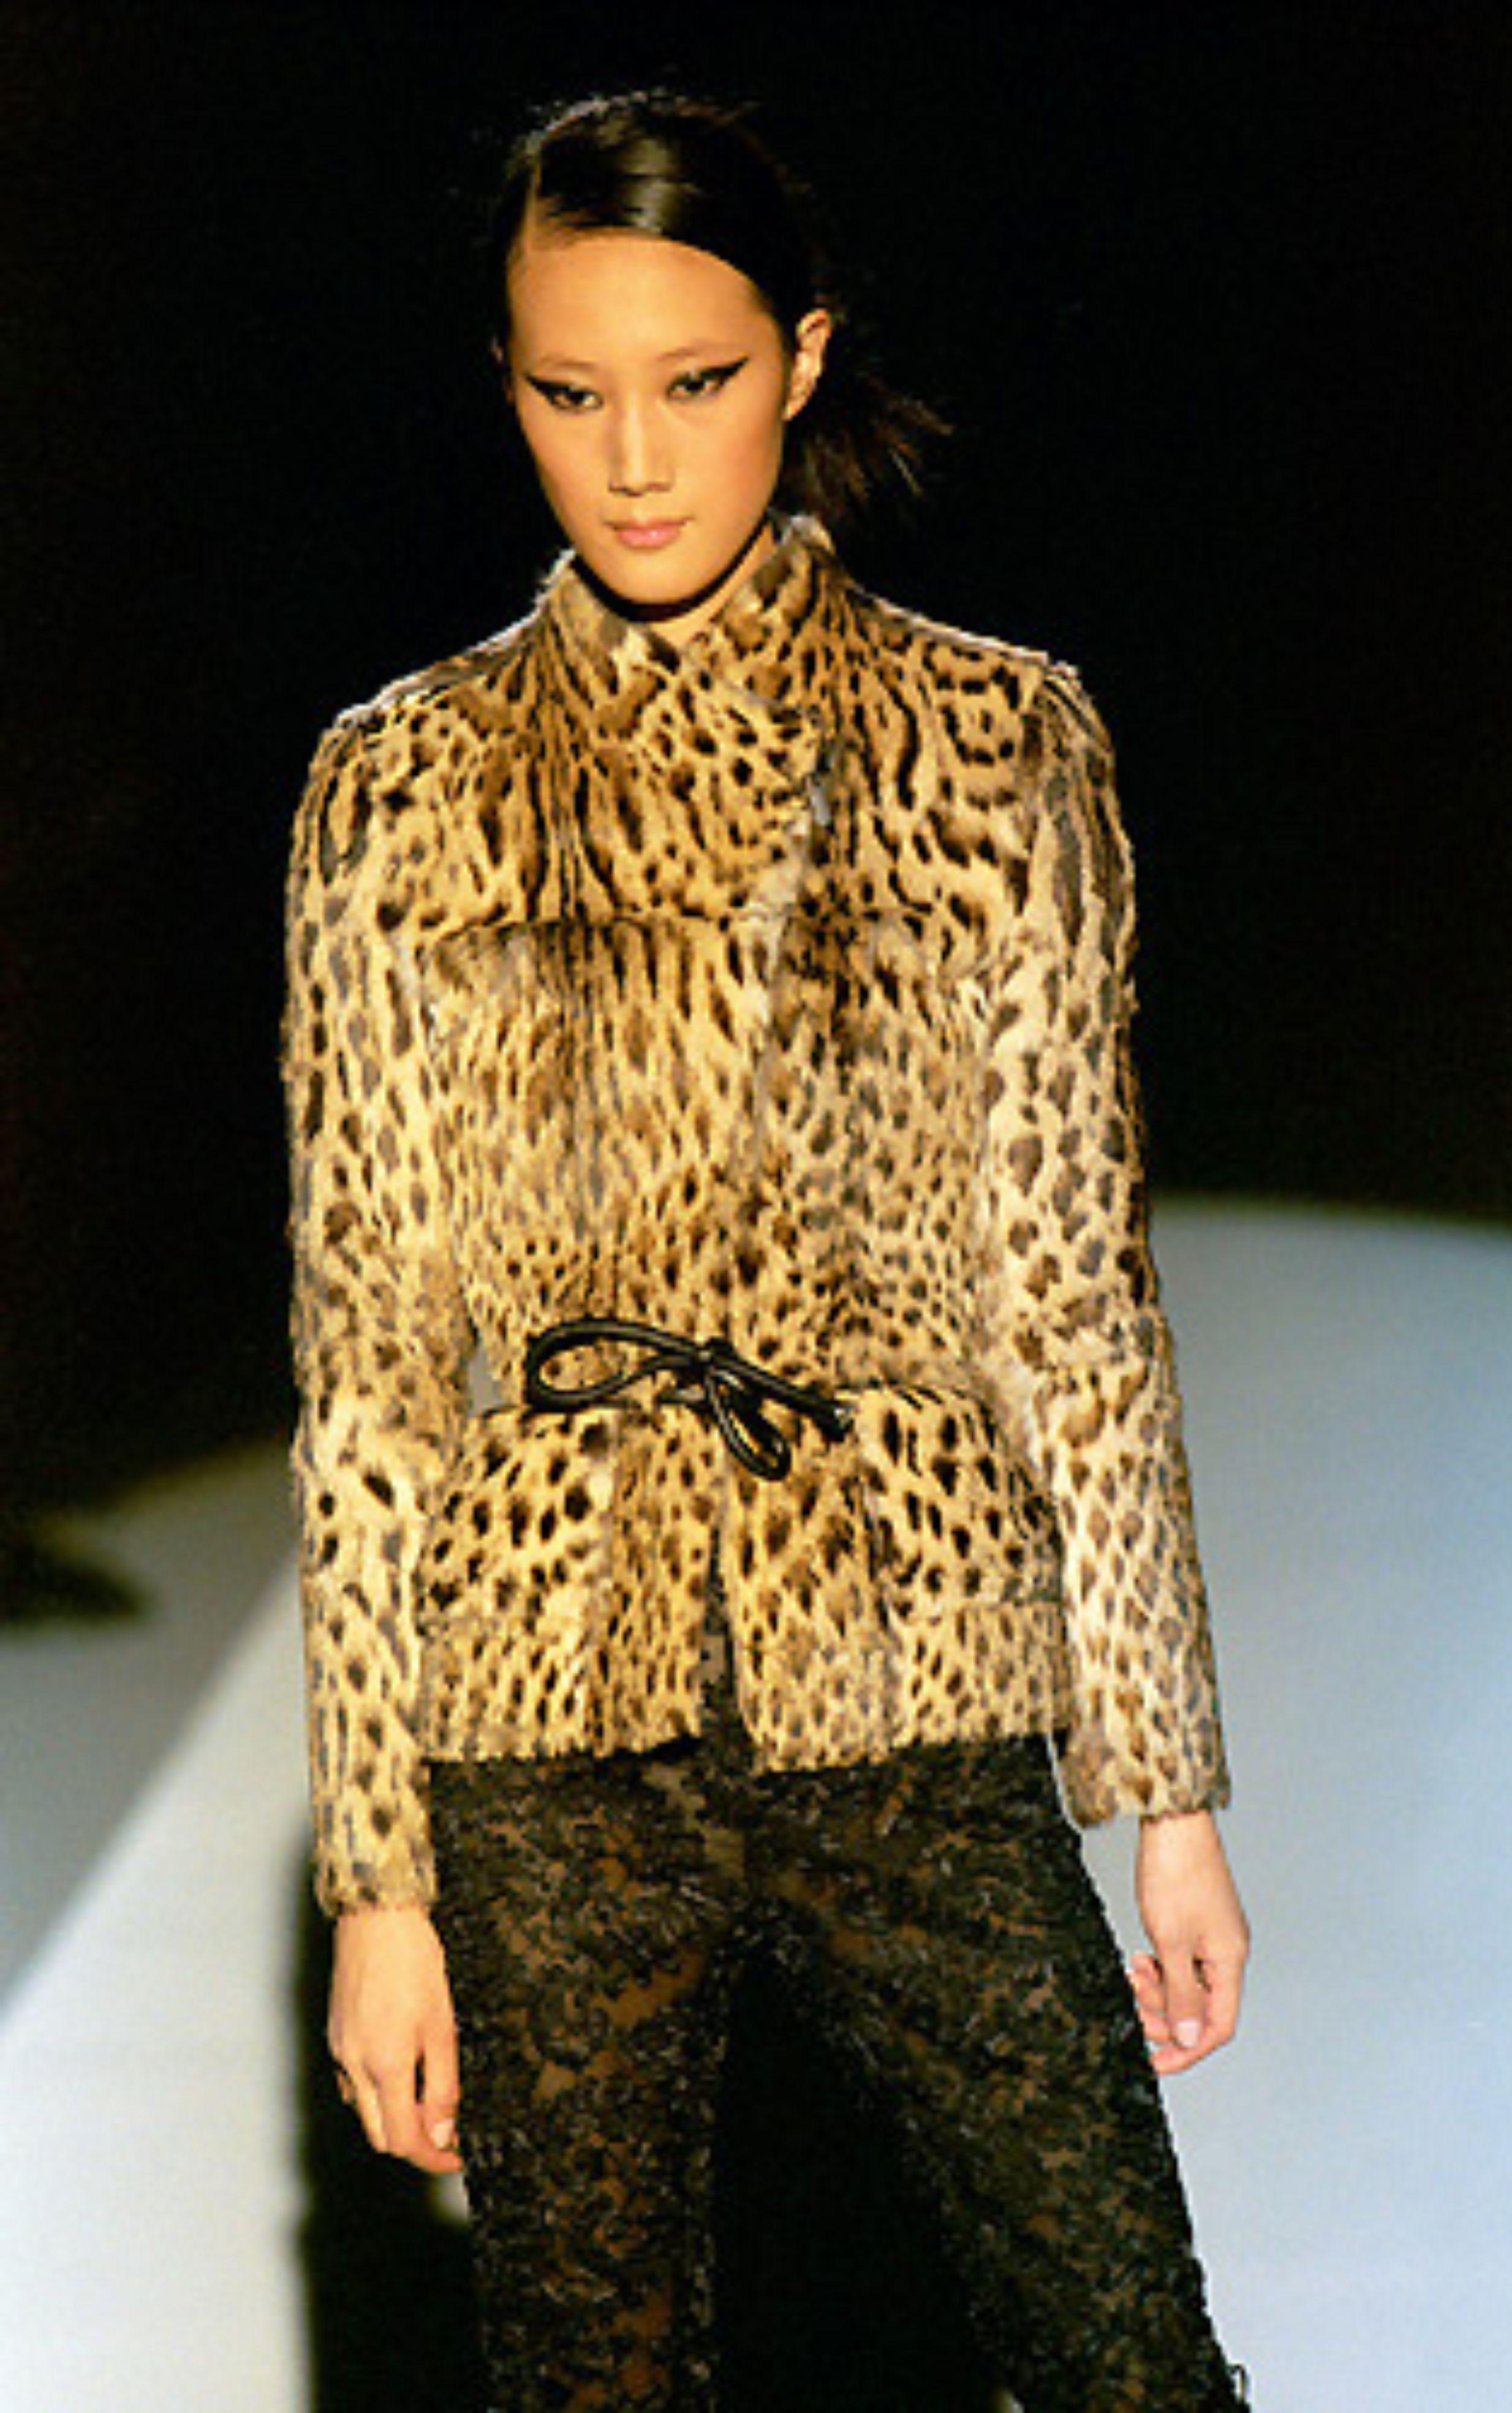 Vintage Gucci 
By Tom Ford
Fall 1999 - seen on the runway, in campaign images and in Vogue US September 1999 issue

Leopard print fur jacket with leather cord belt
Black leather lining
Hidden zip
Zip up cuffs
Flap pockets on front

Size IT 42 / UK